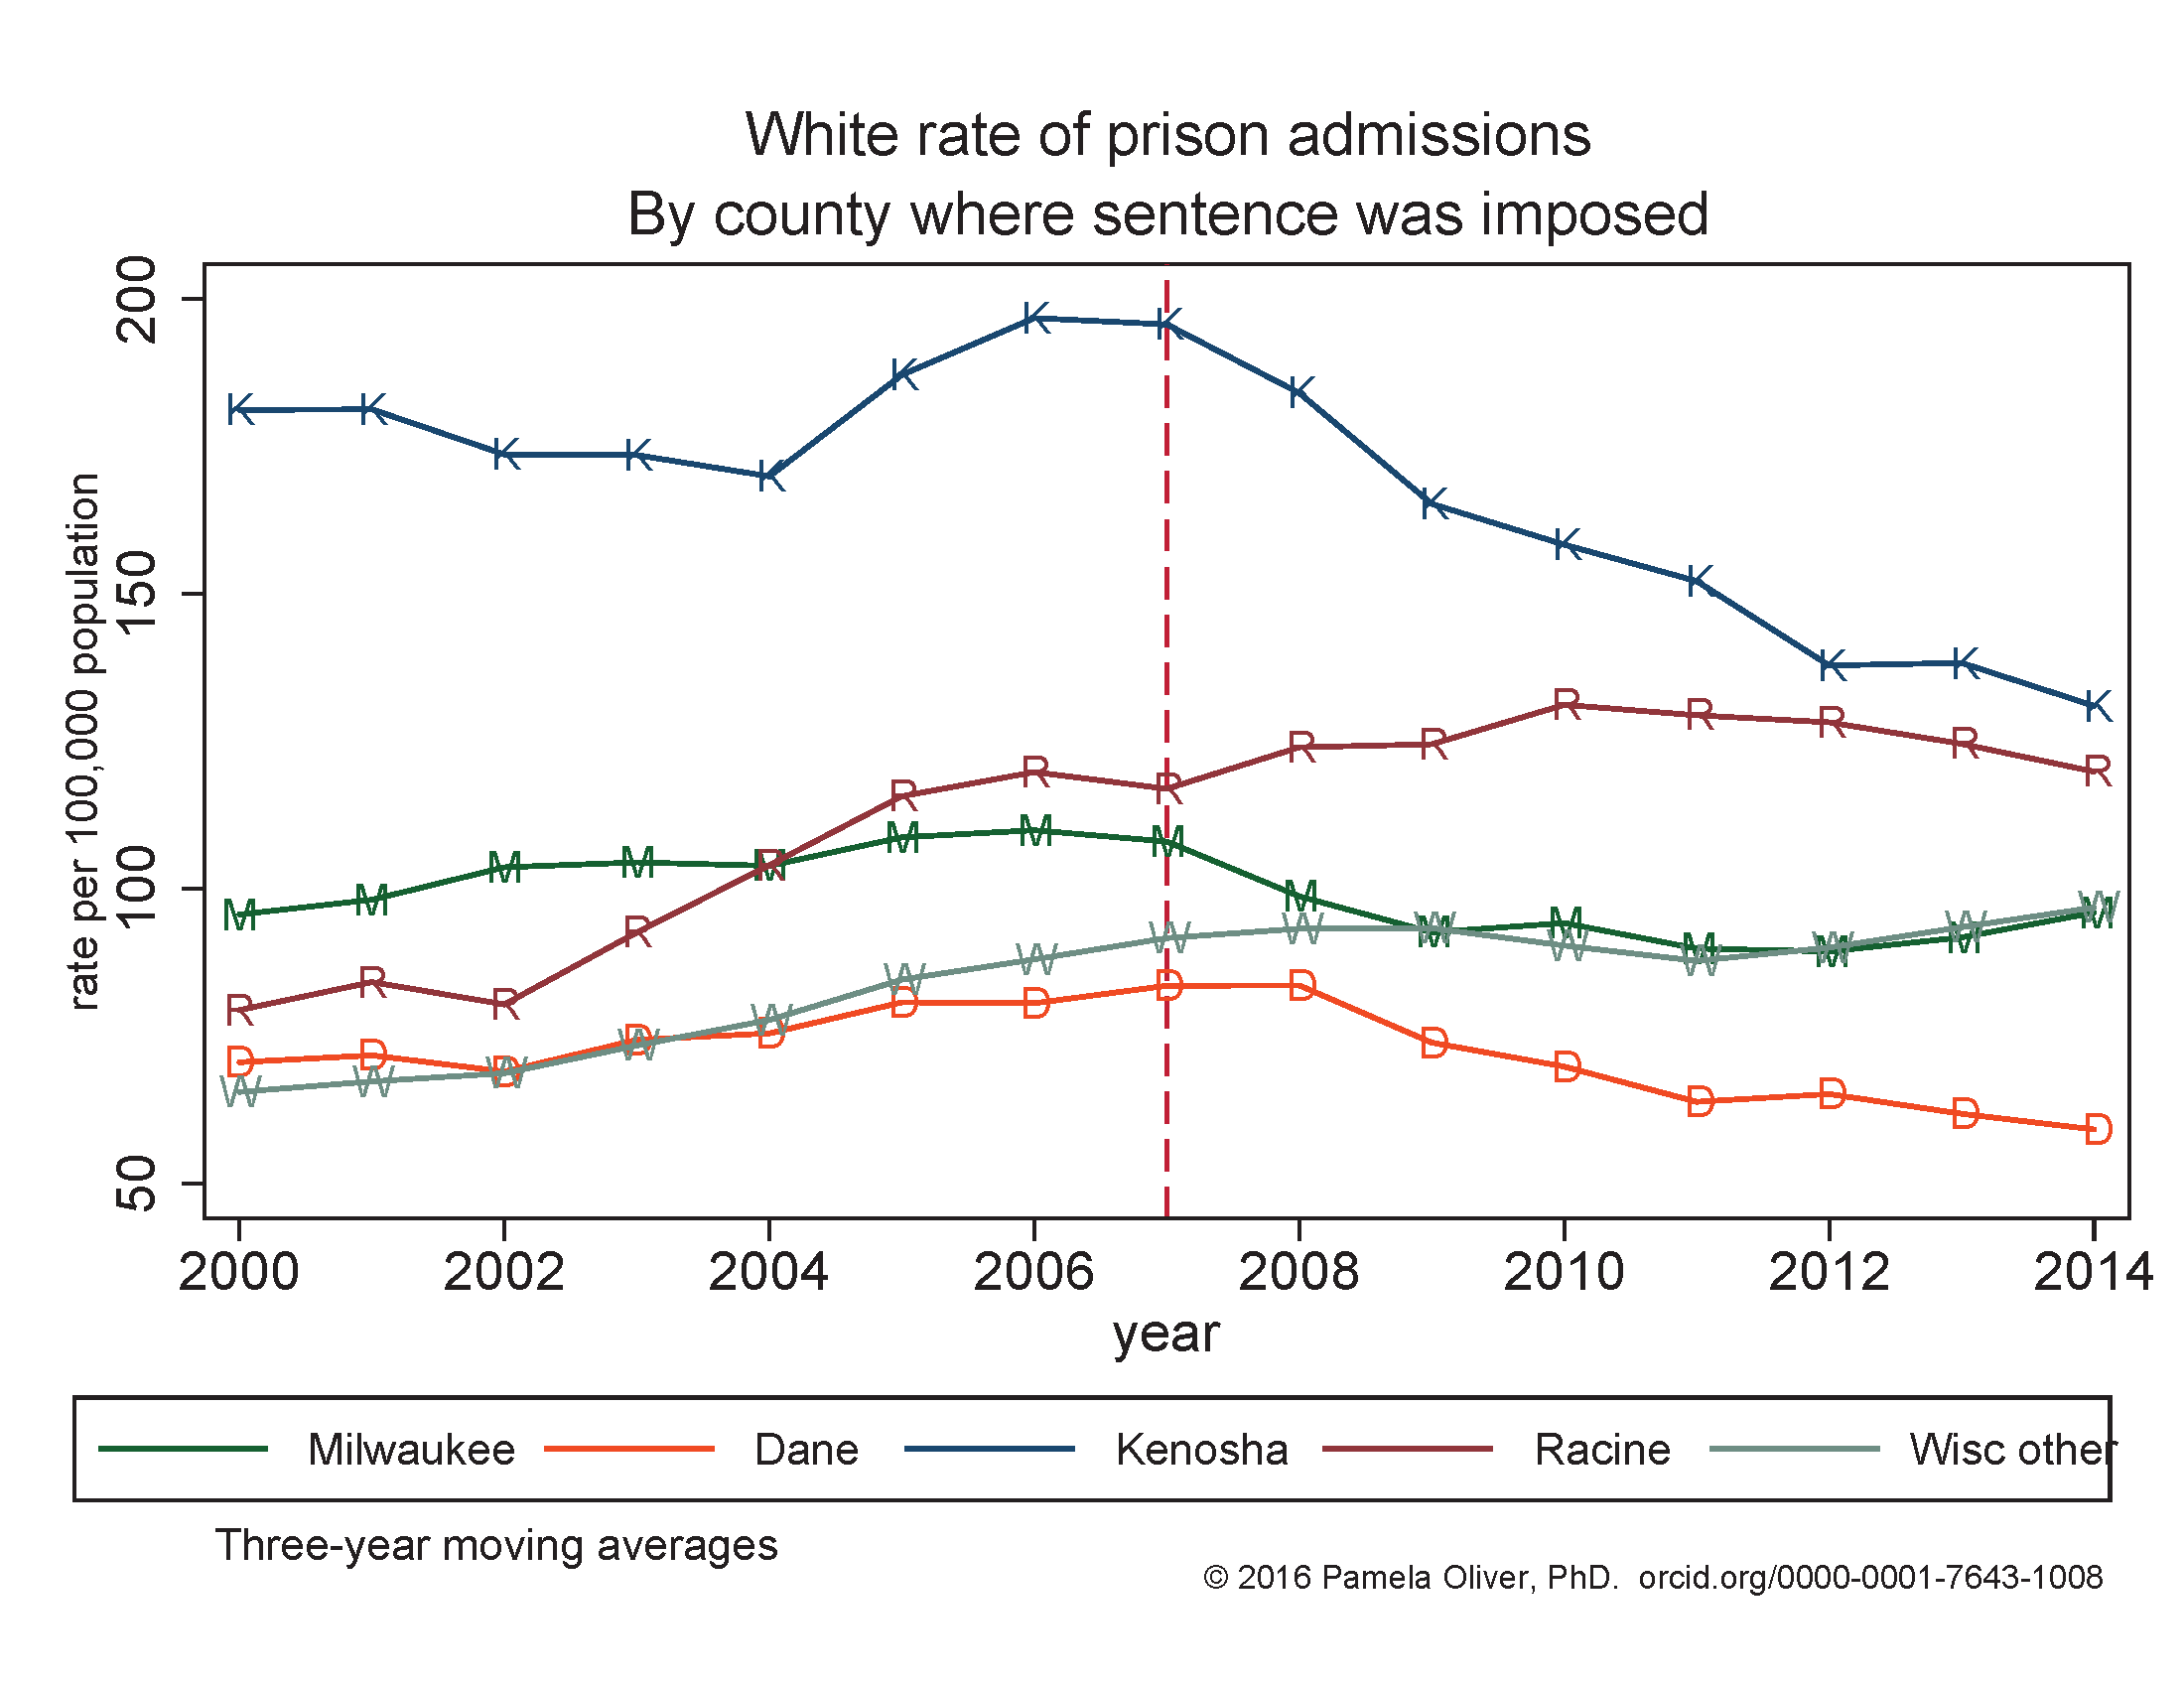 Rate of White prison admissions by Wisconsin County